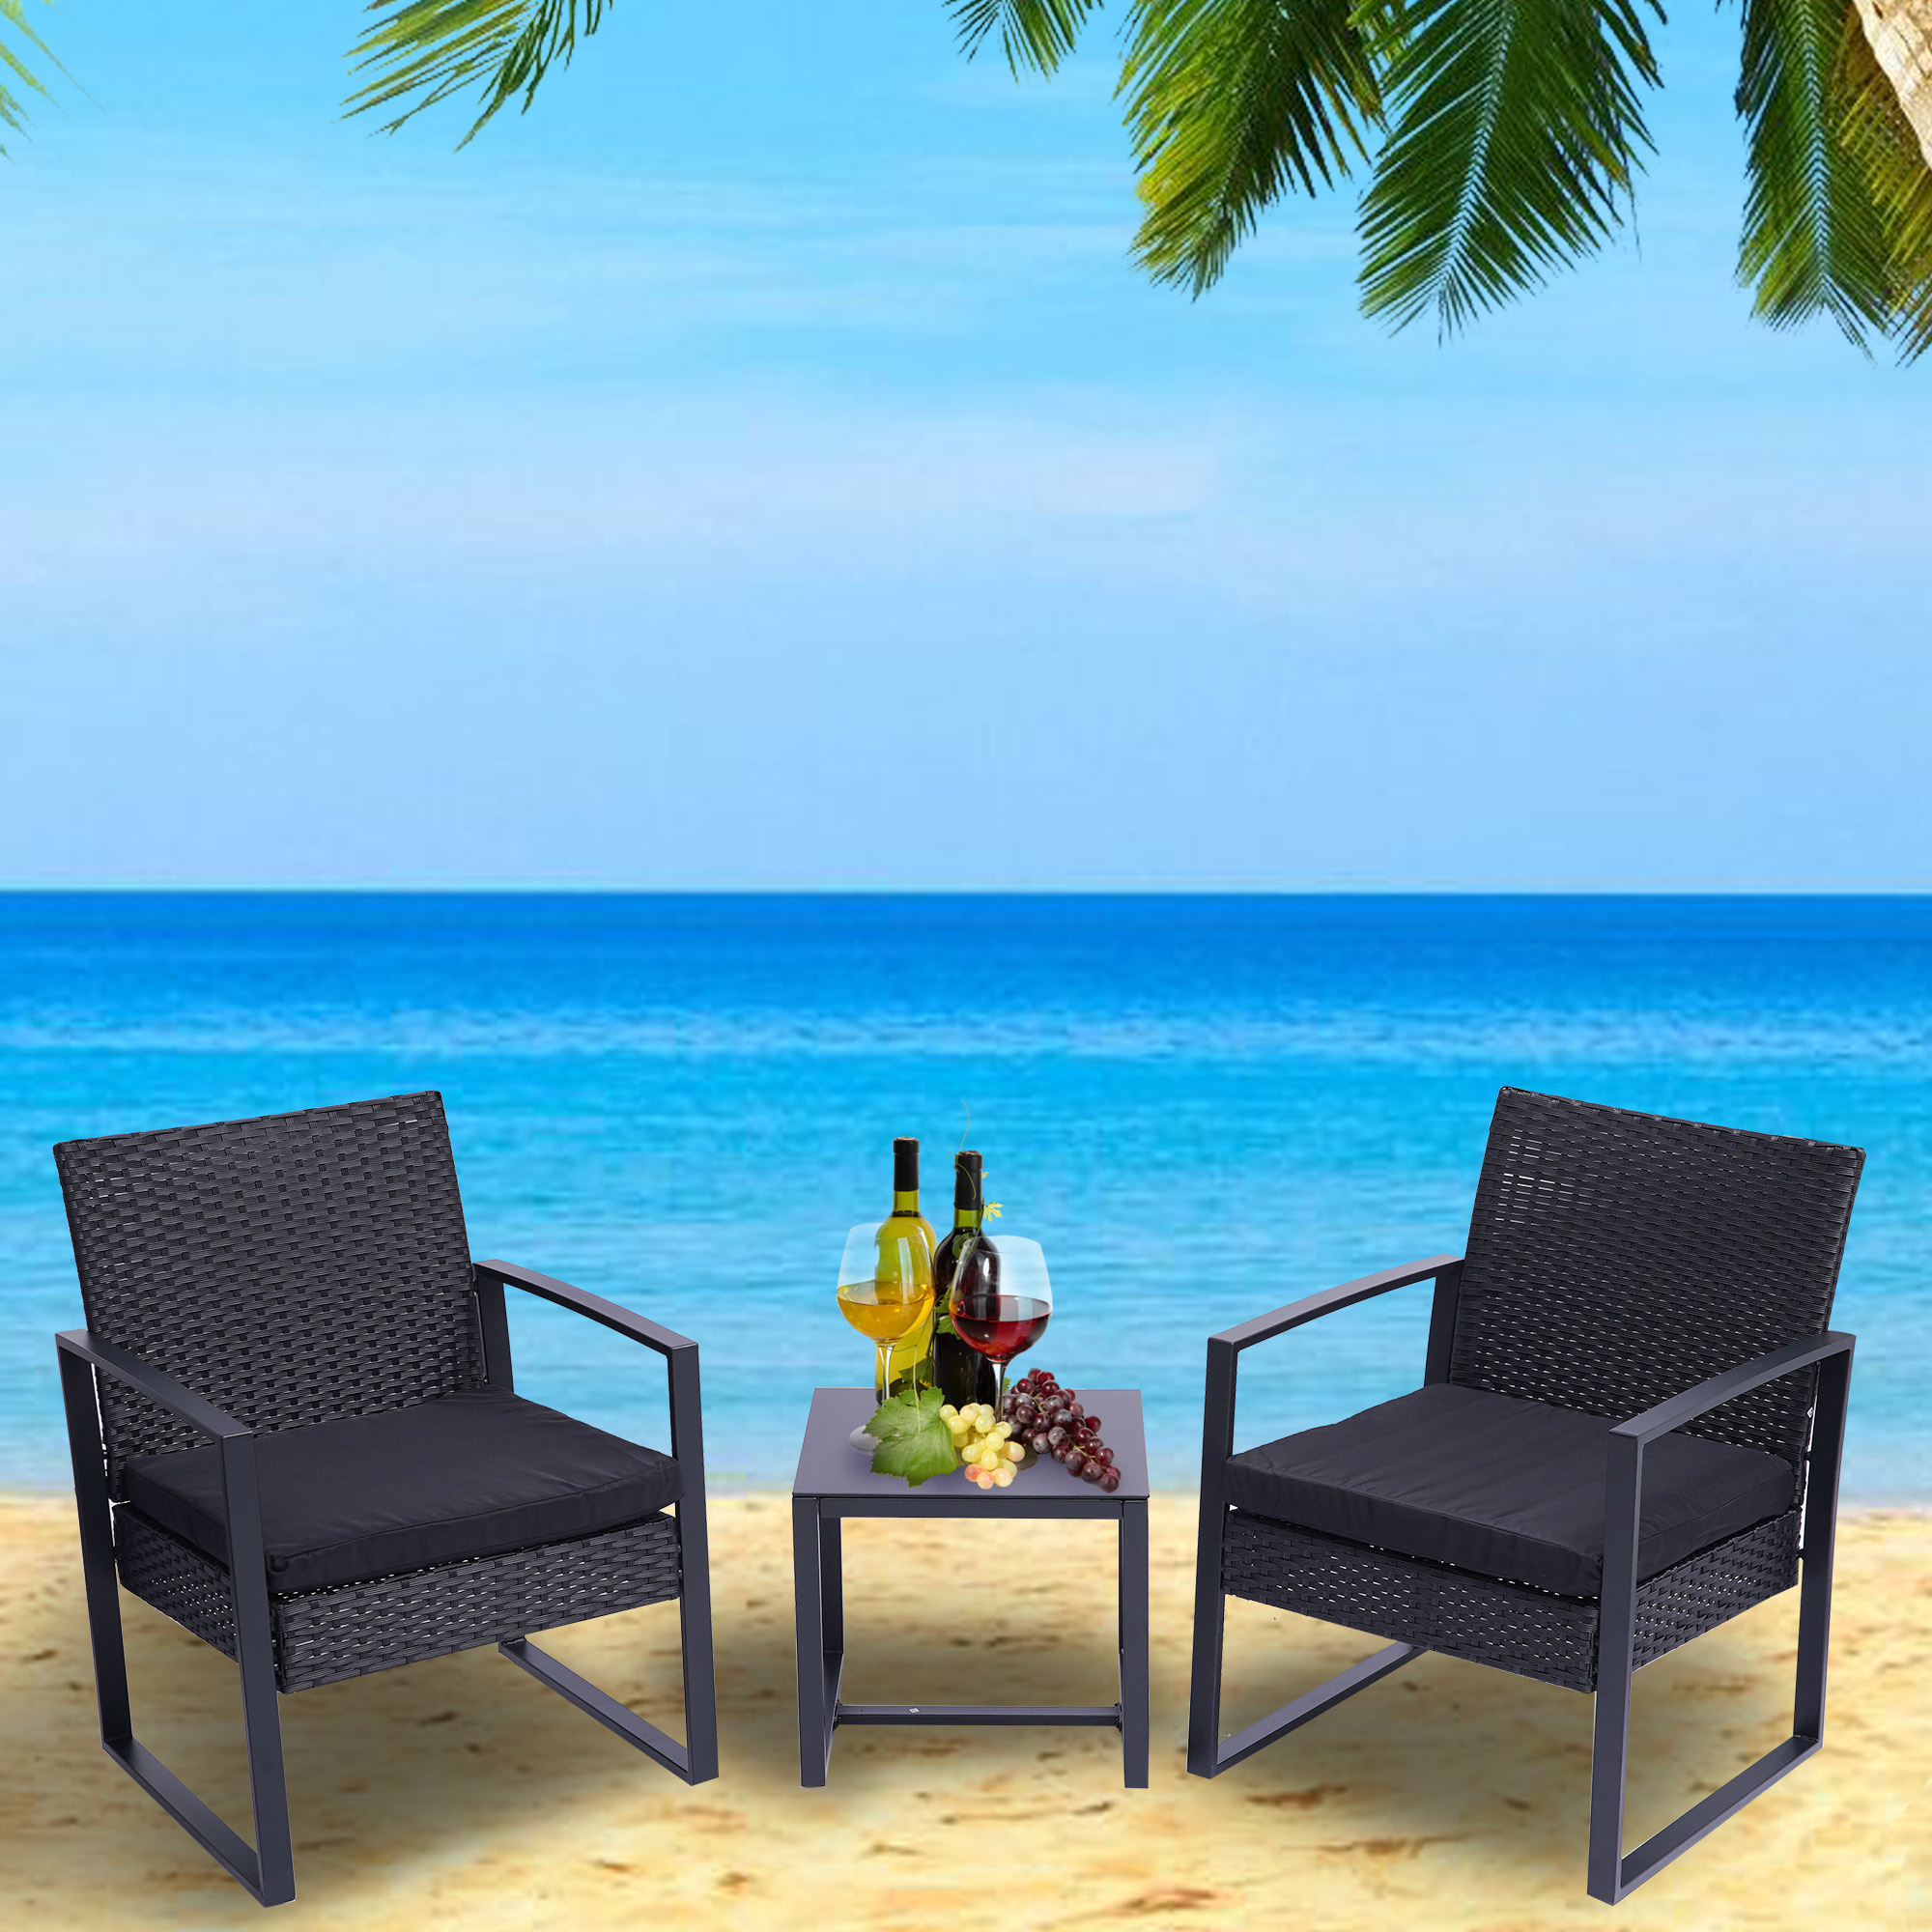 3 Pieces Patio Set Outdoor Wicker Patio Furniture Sets Modern Set Rattan Chair Conversation Sets with Coffee Table for Yard and Bistro (Black)-Boyel Living